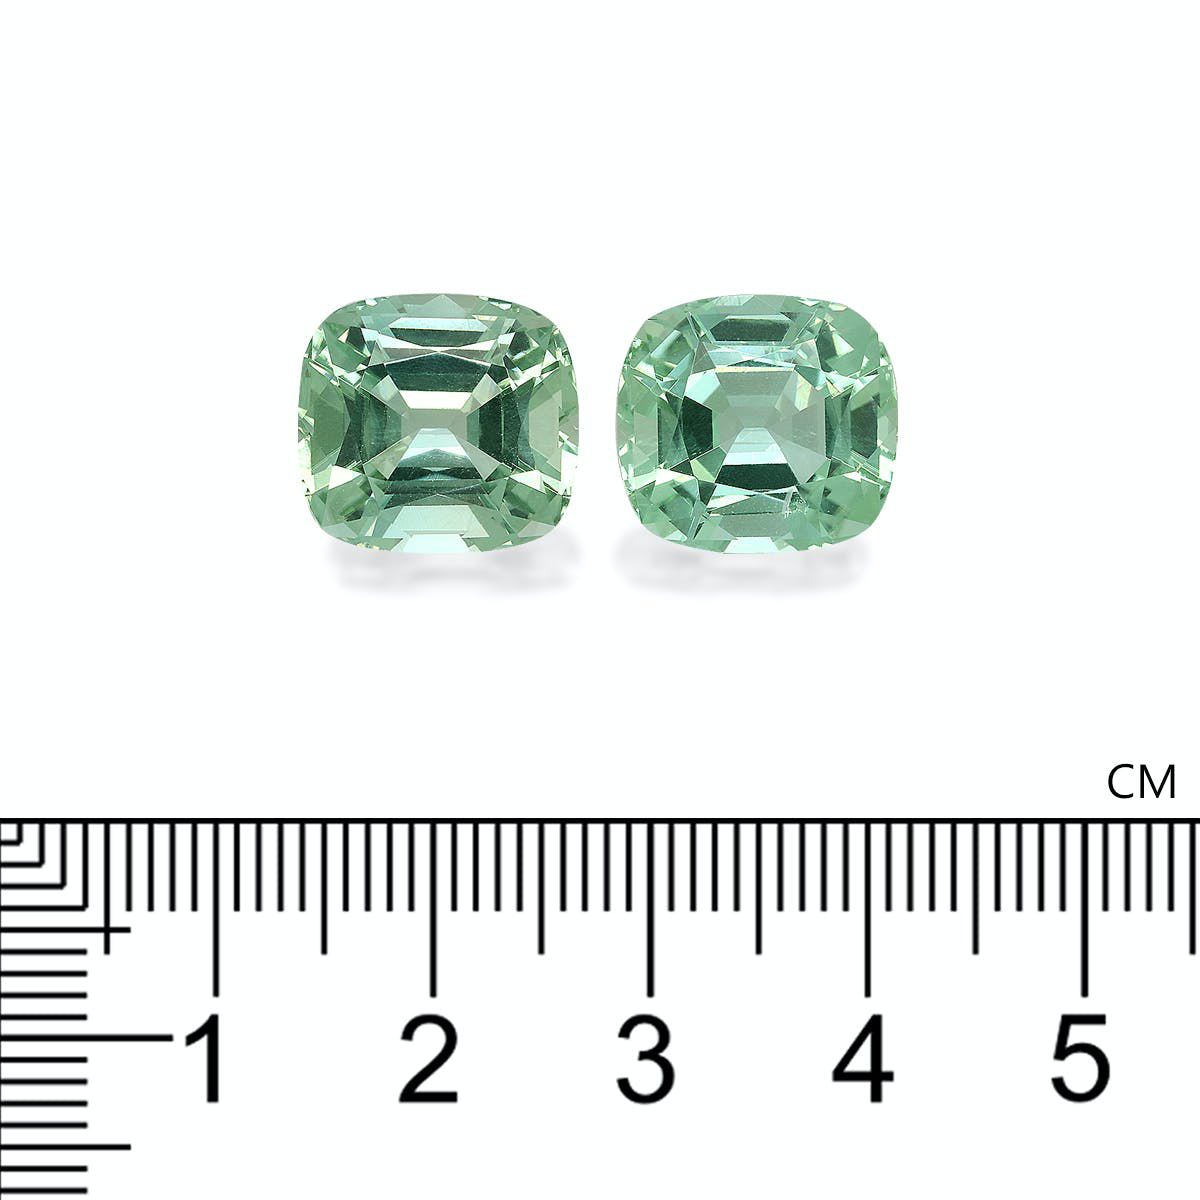 Picture of Mist Green Tourmaline 14.76ct - Pair (TG1366)